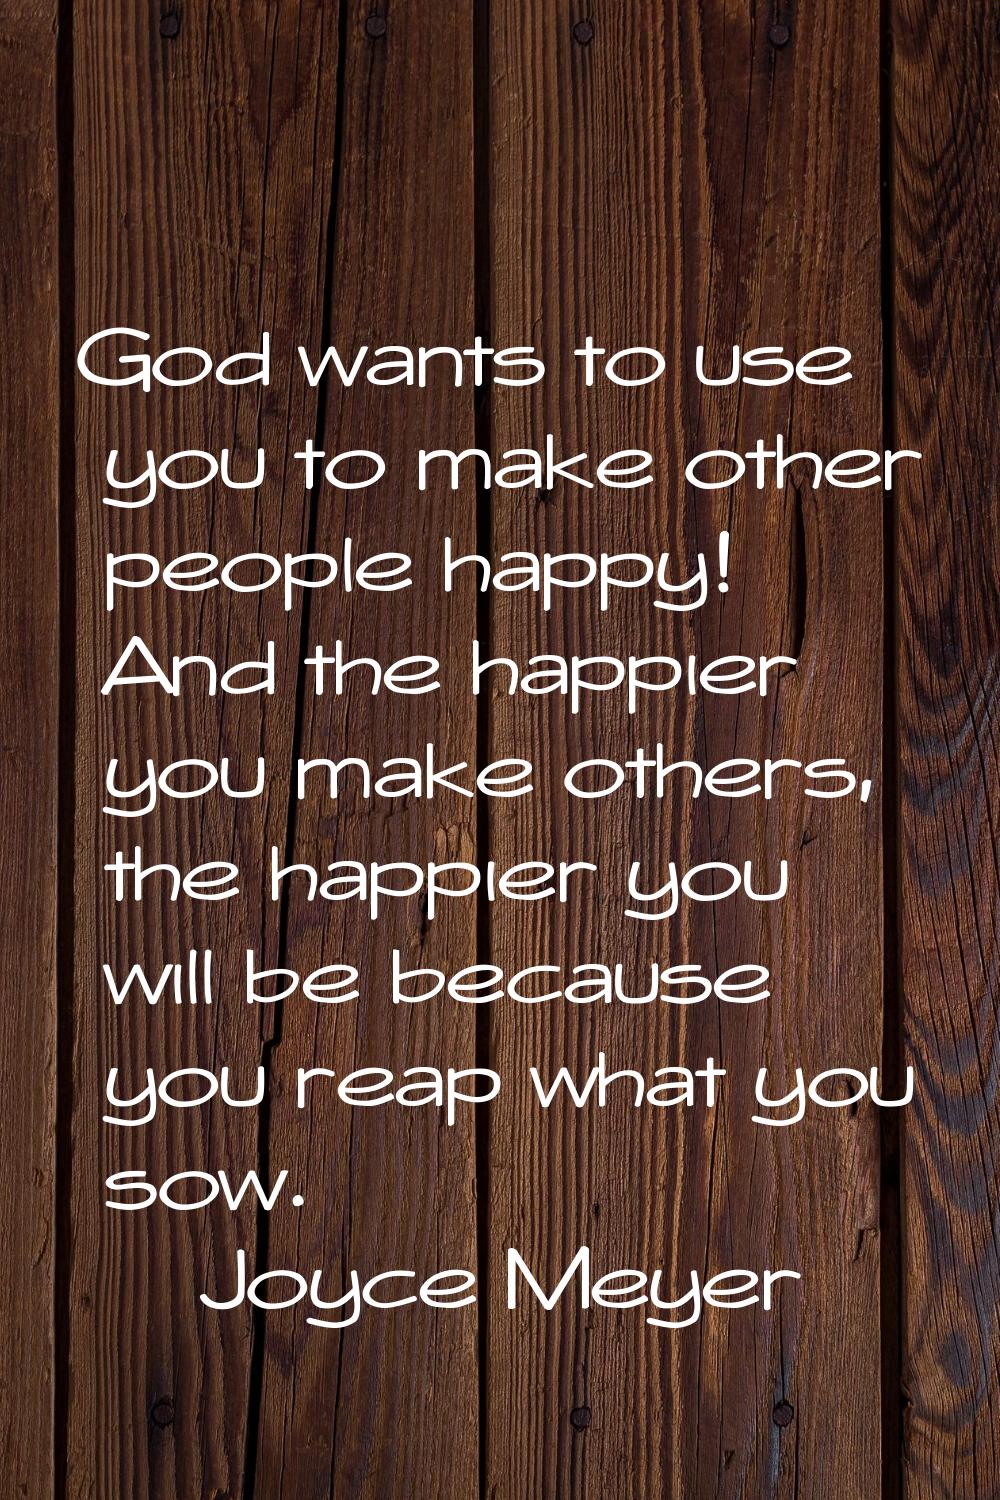 God wants to use you to make other people happy! And the happier you make others, the happier you w